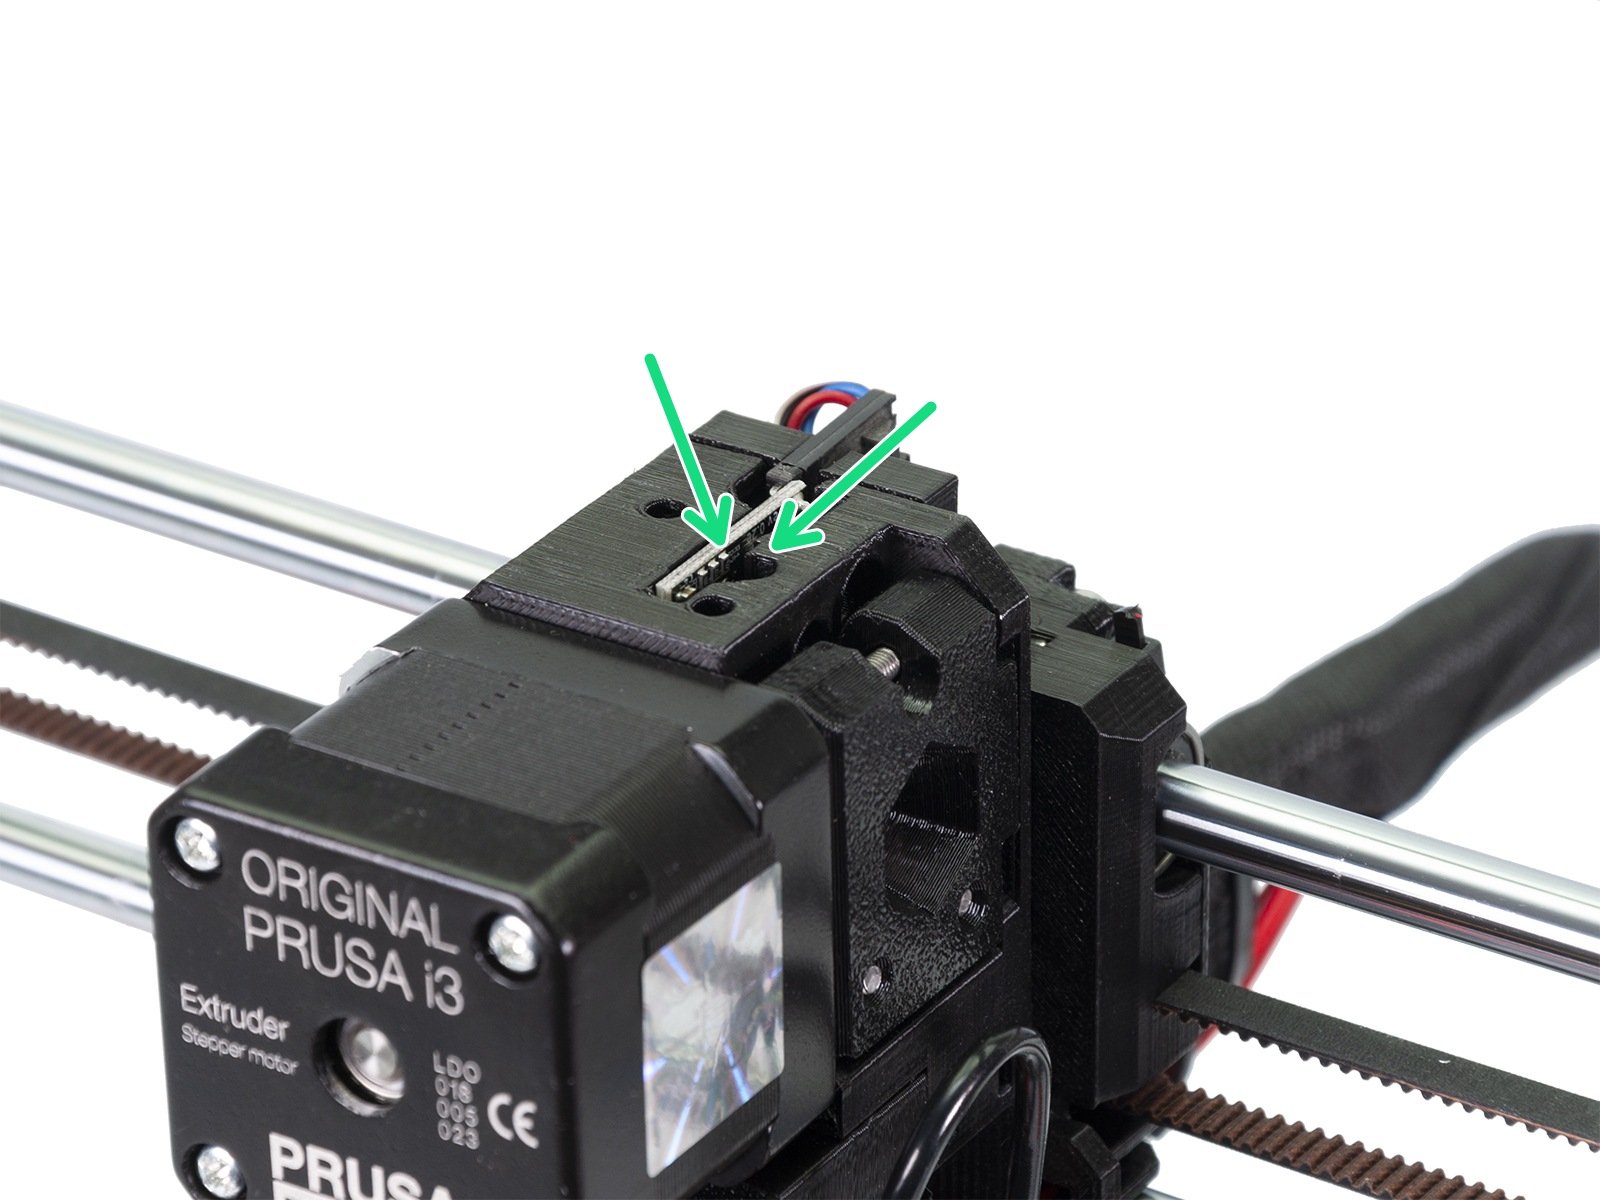 Mounting the Filament-sensor-cover (part 2)